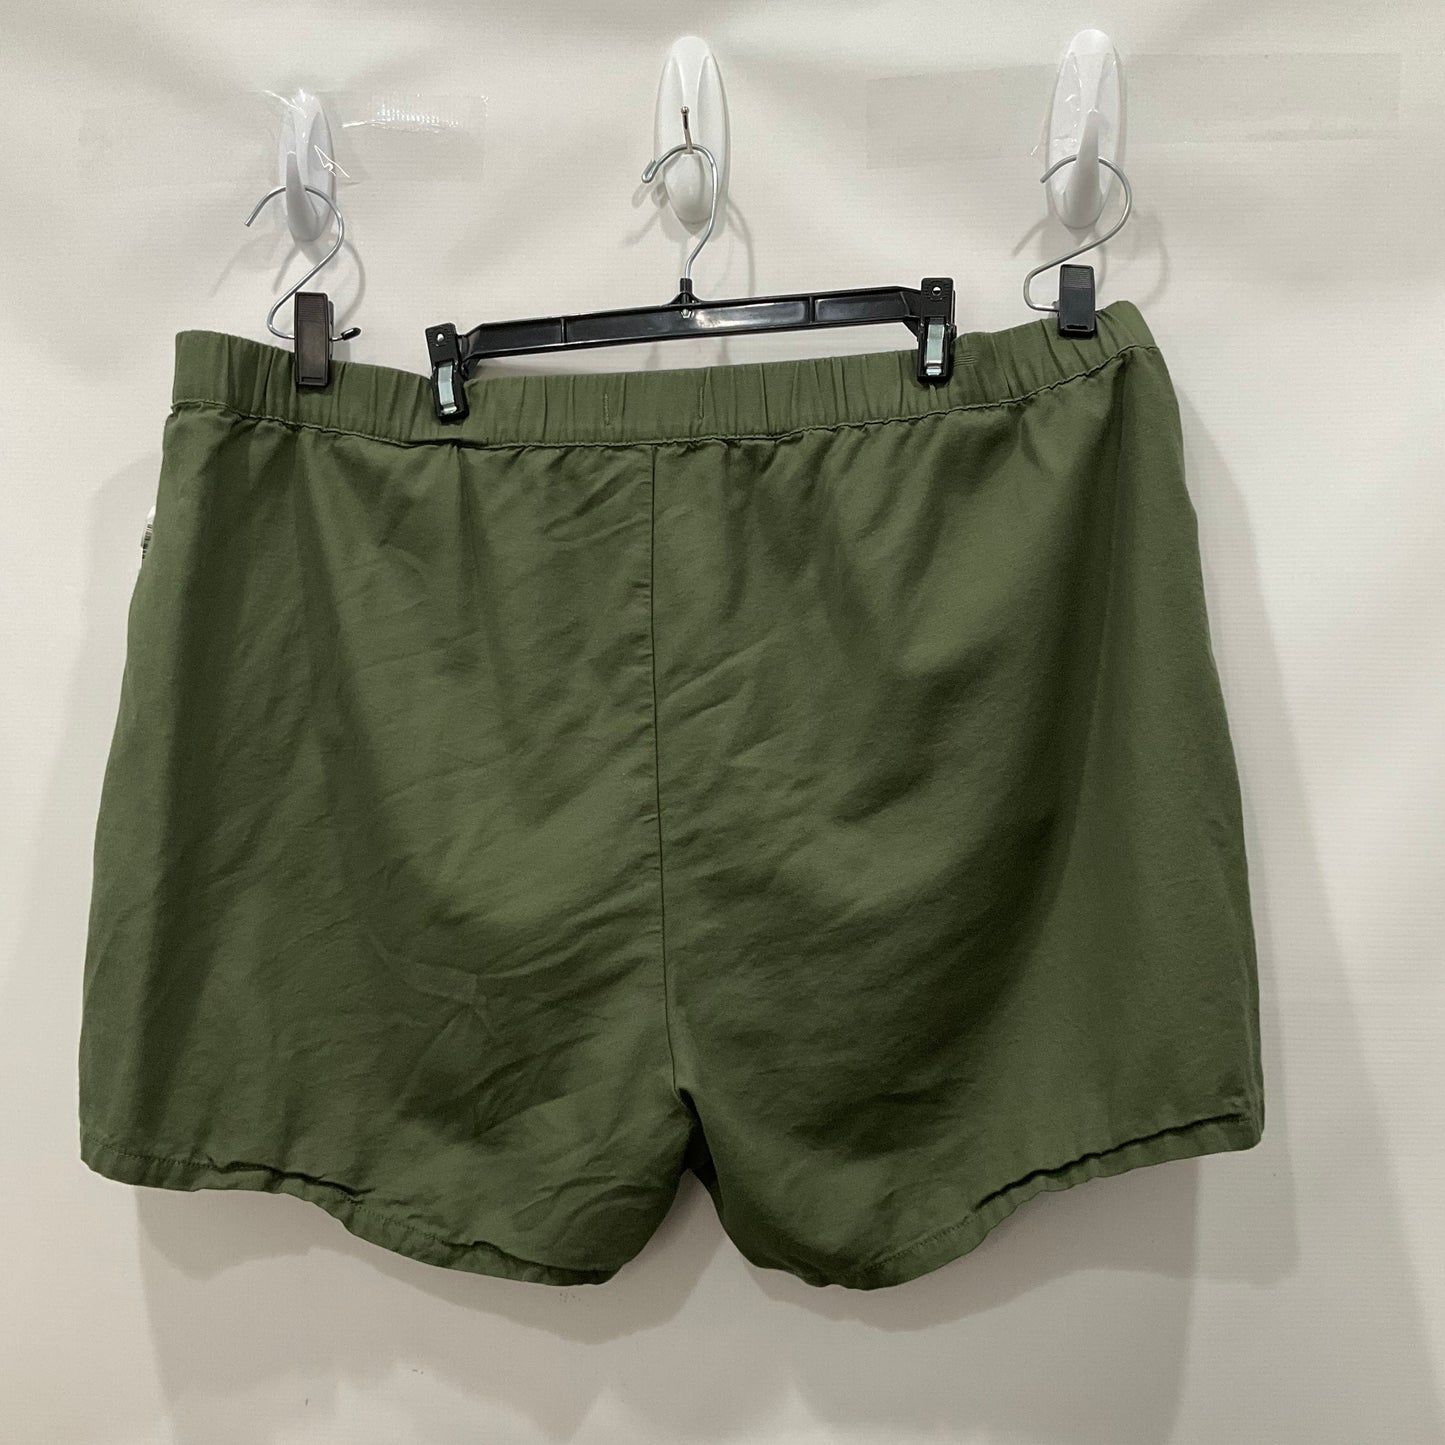 Green Shorts Madewell, Size 2x